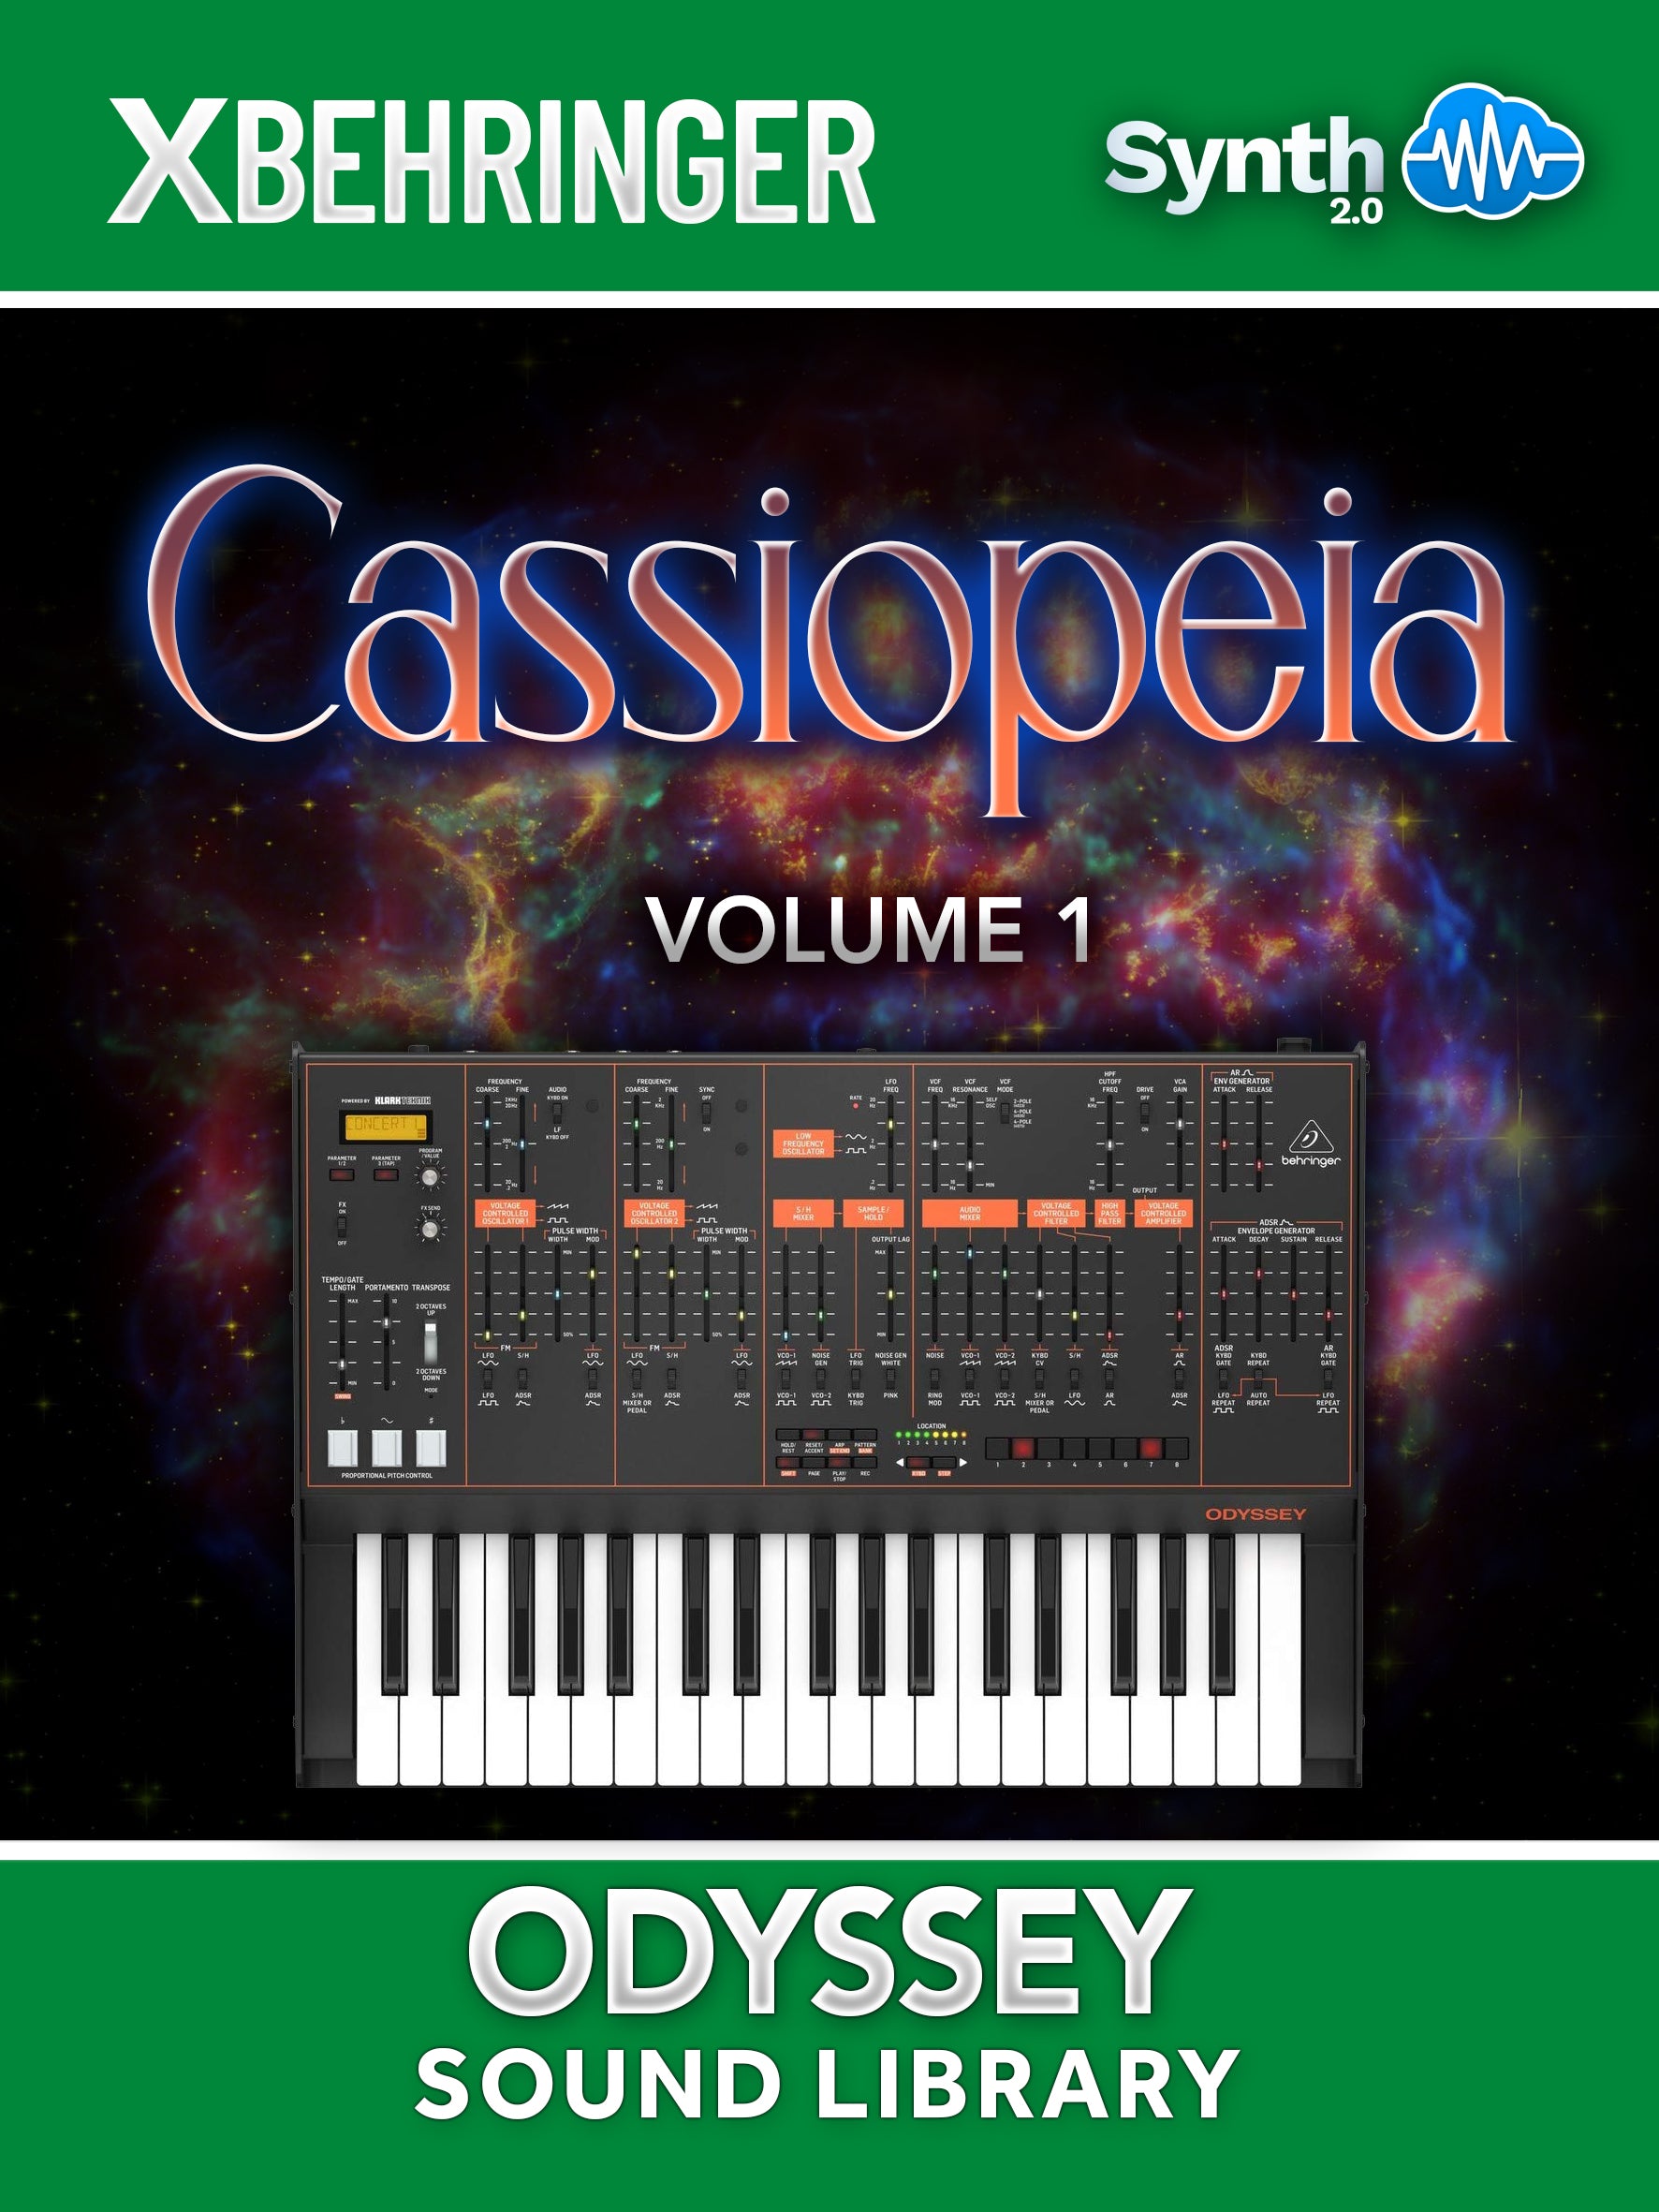 LFO091 - ( Bundle ) - The World of Sequences + Cassiopeia V1 - Behringer Odyssey